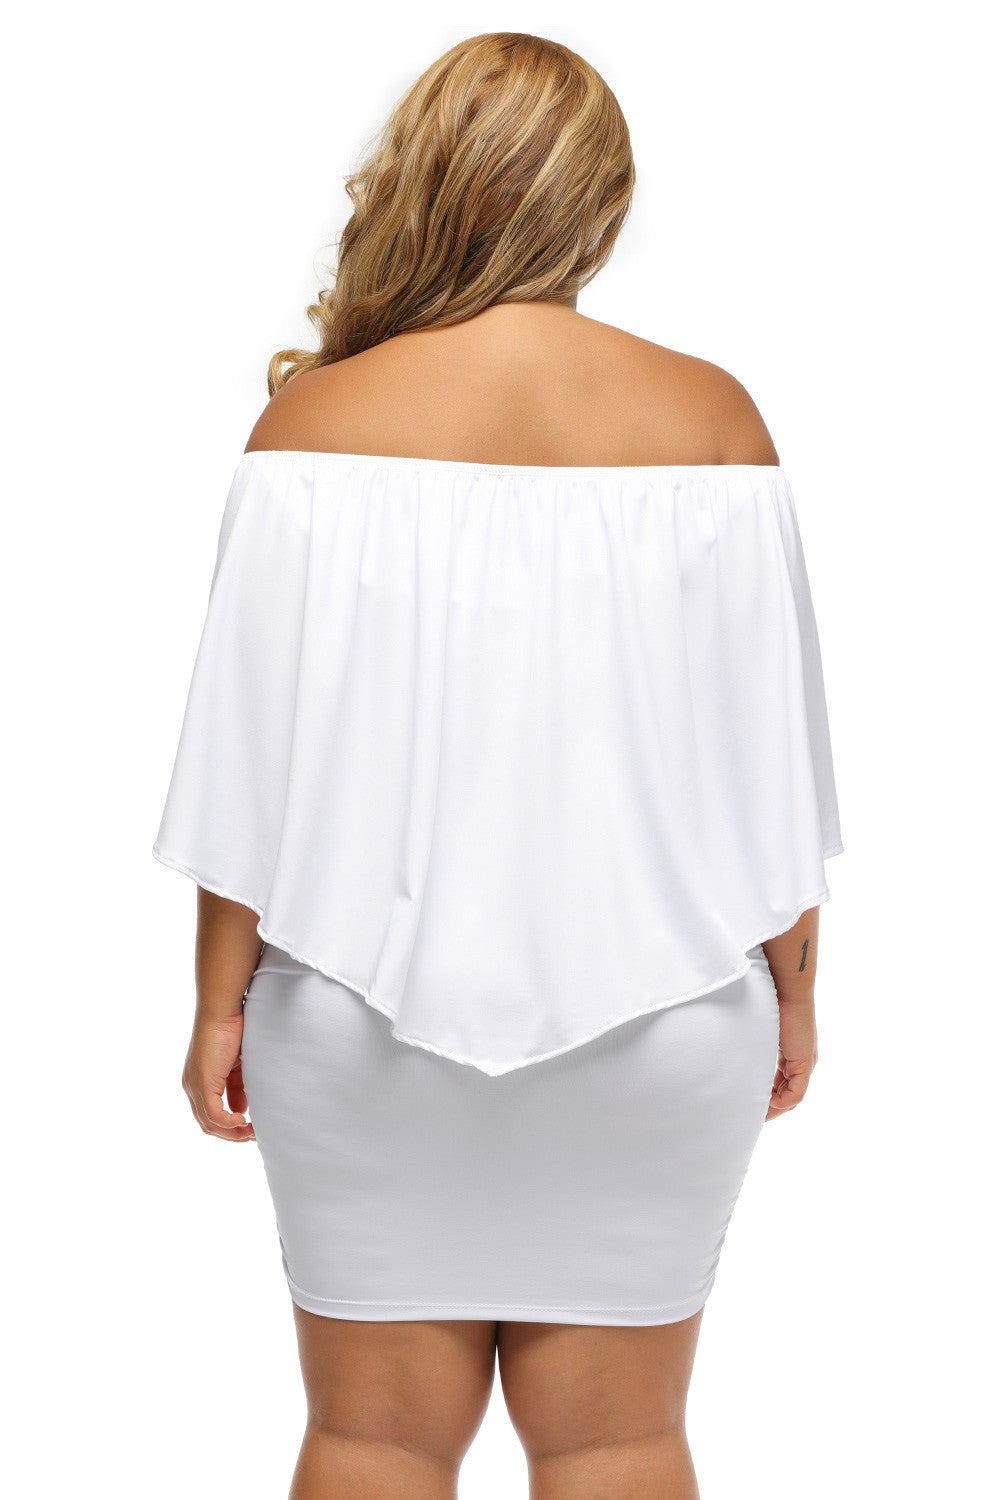 Robe Grande Taille Pour Blanc Court Collerette Epaules Denudees